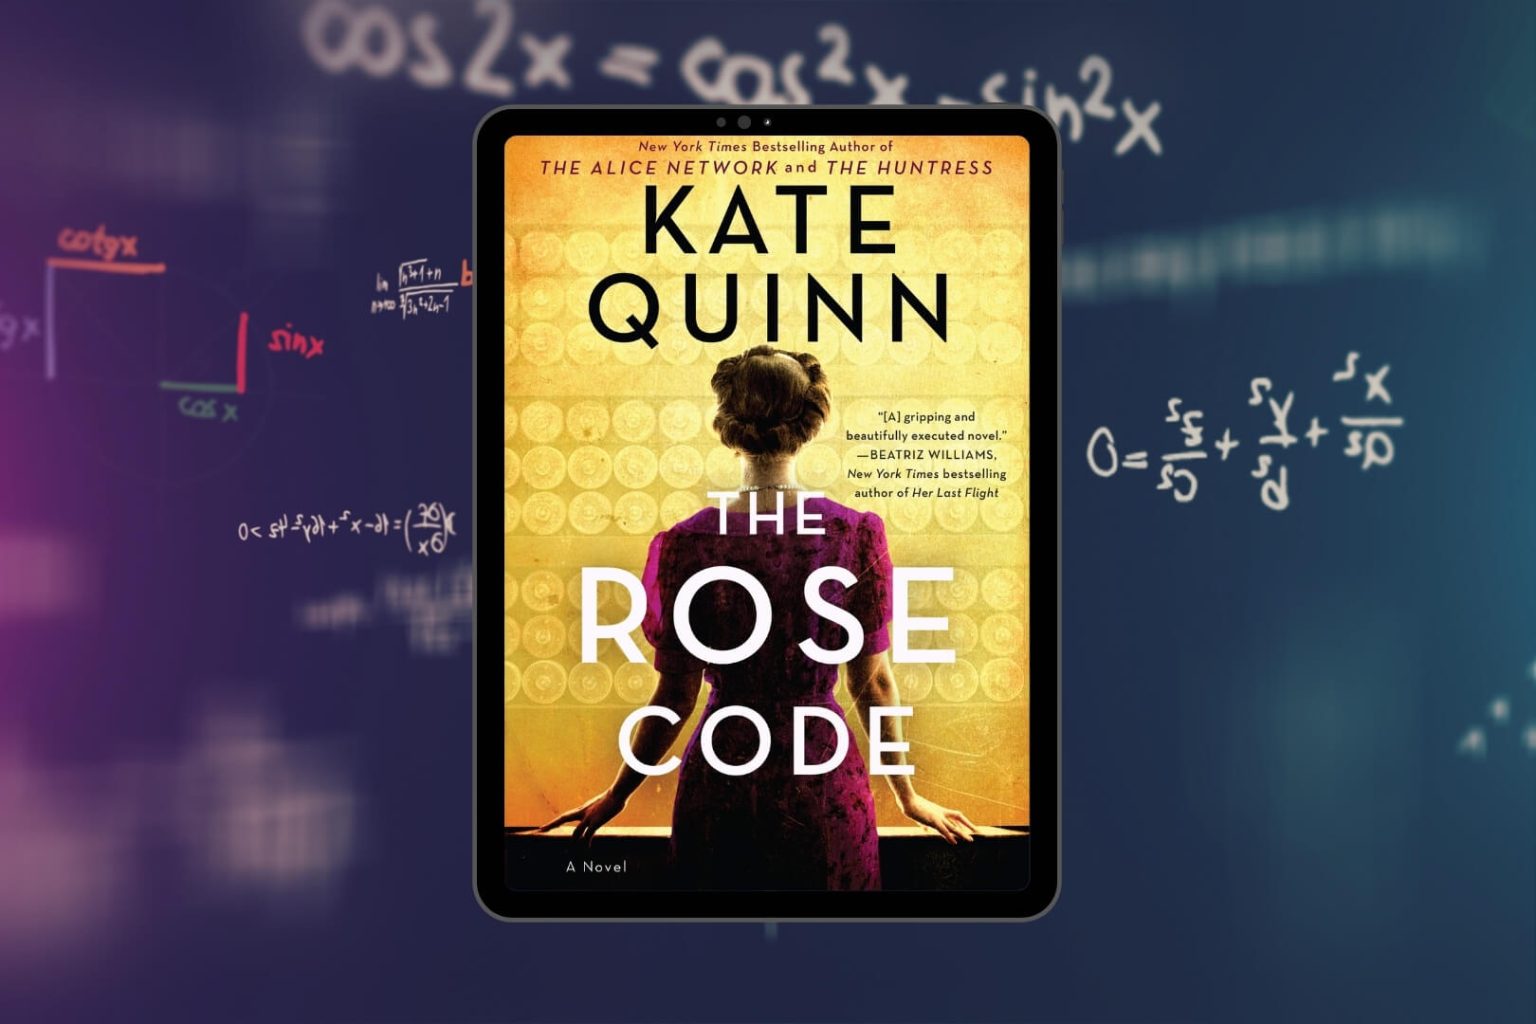 the rose code by kate quinn summary